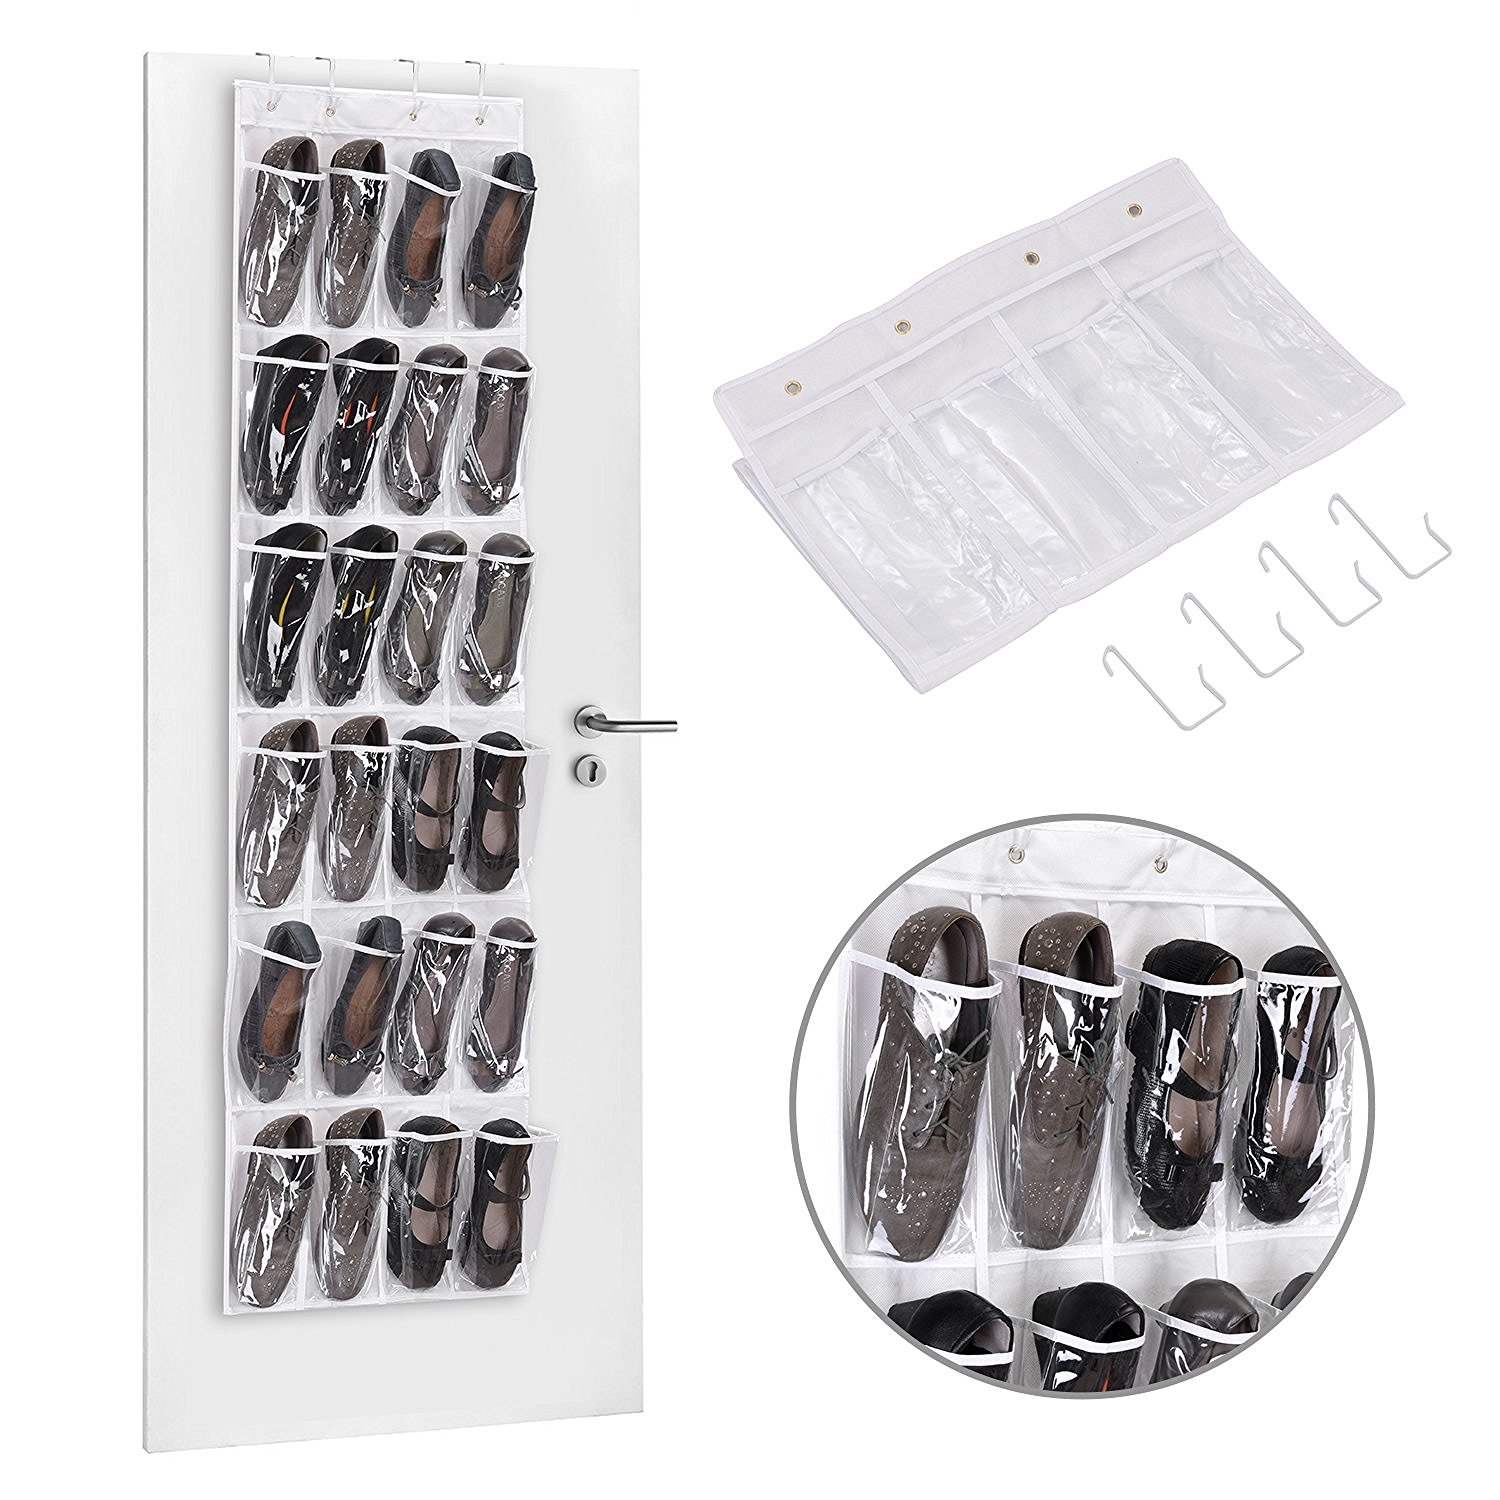 Prime Members: Over the Door Shoe Organizer (With 24 Pockets) Only $3.49 Shipped!